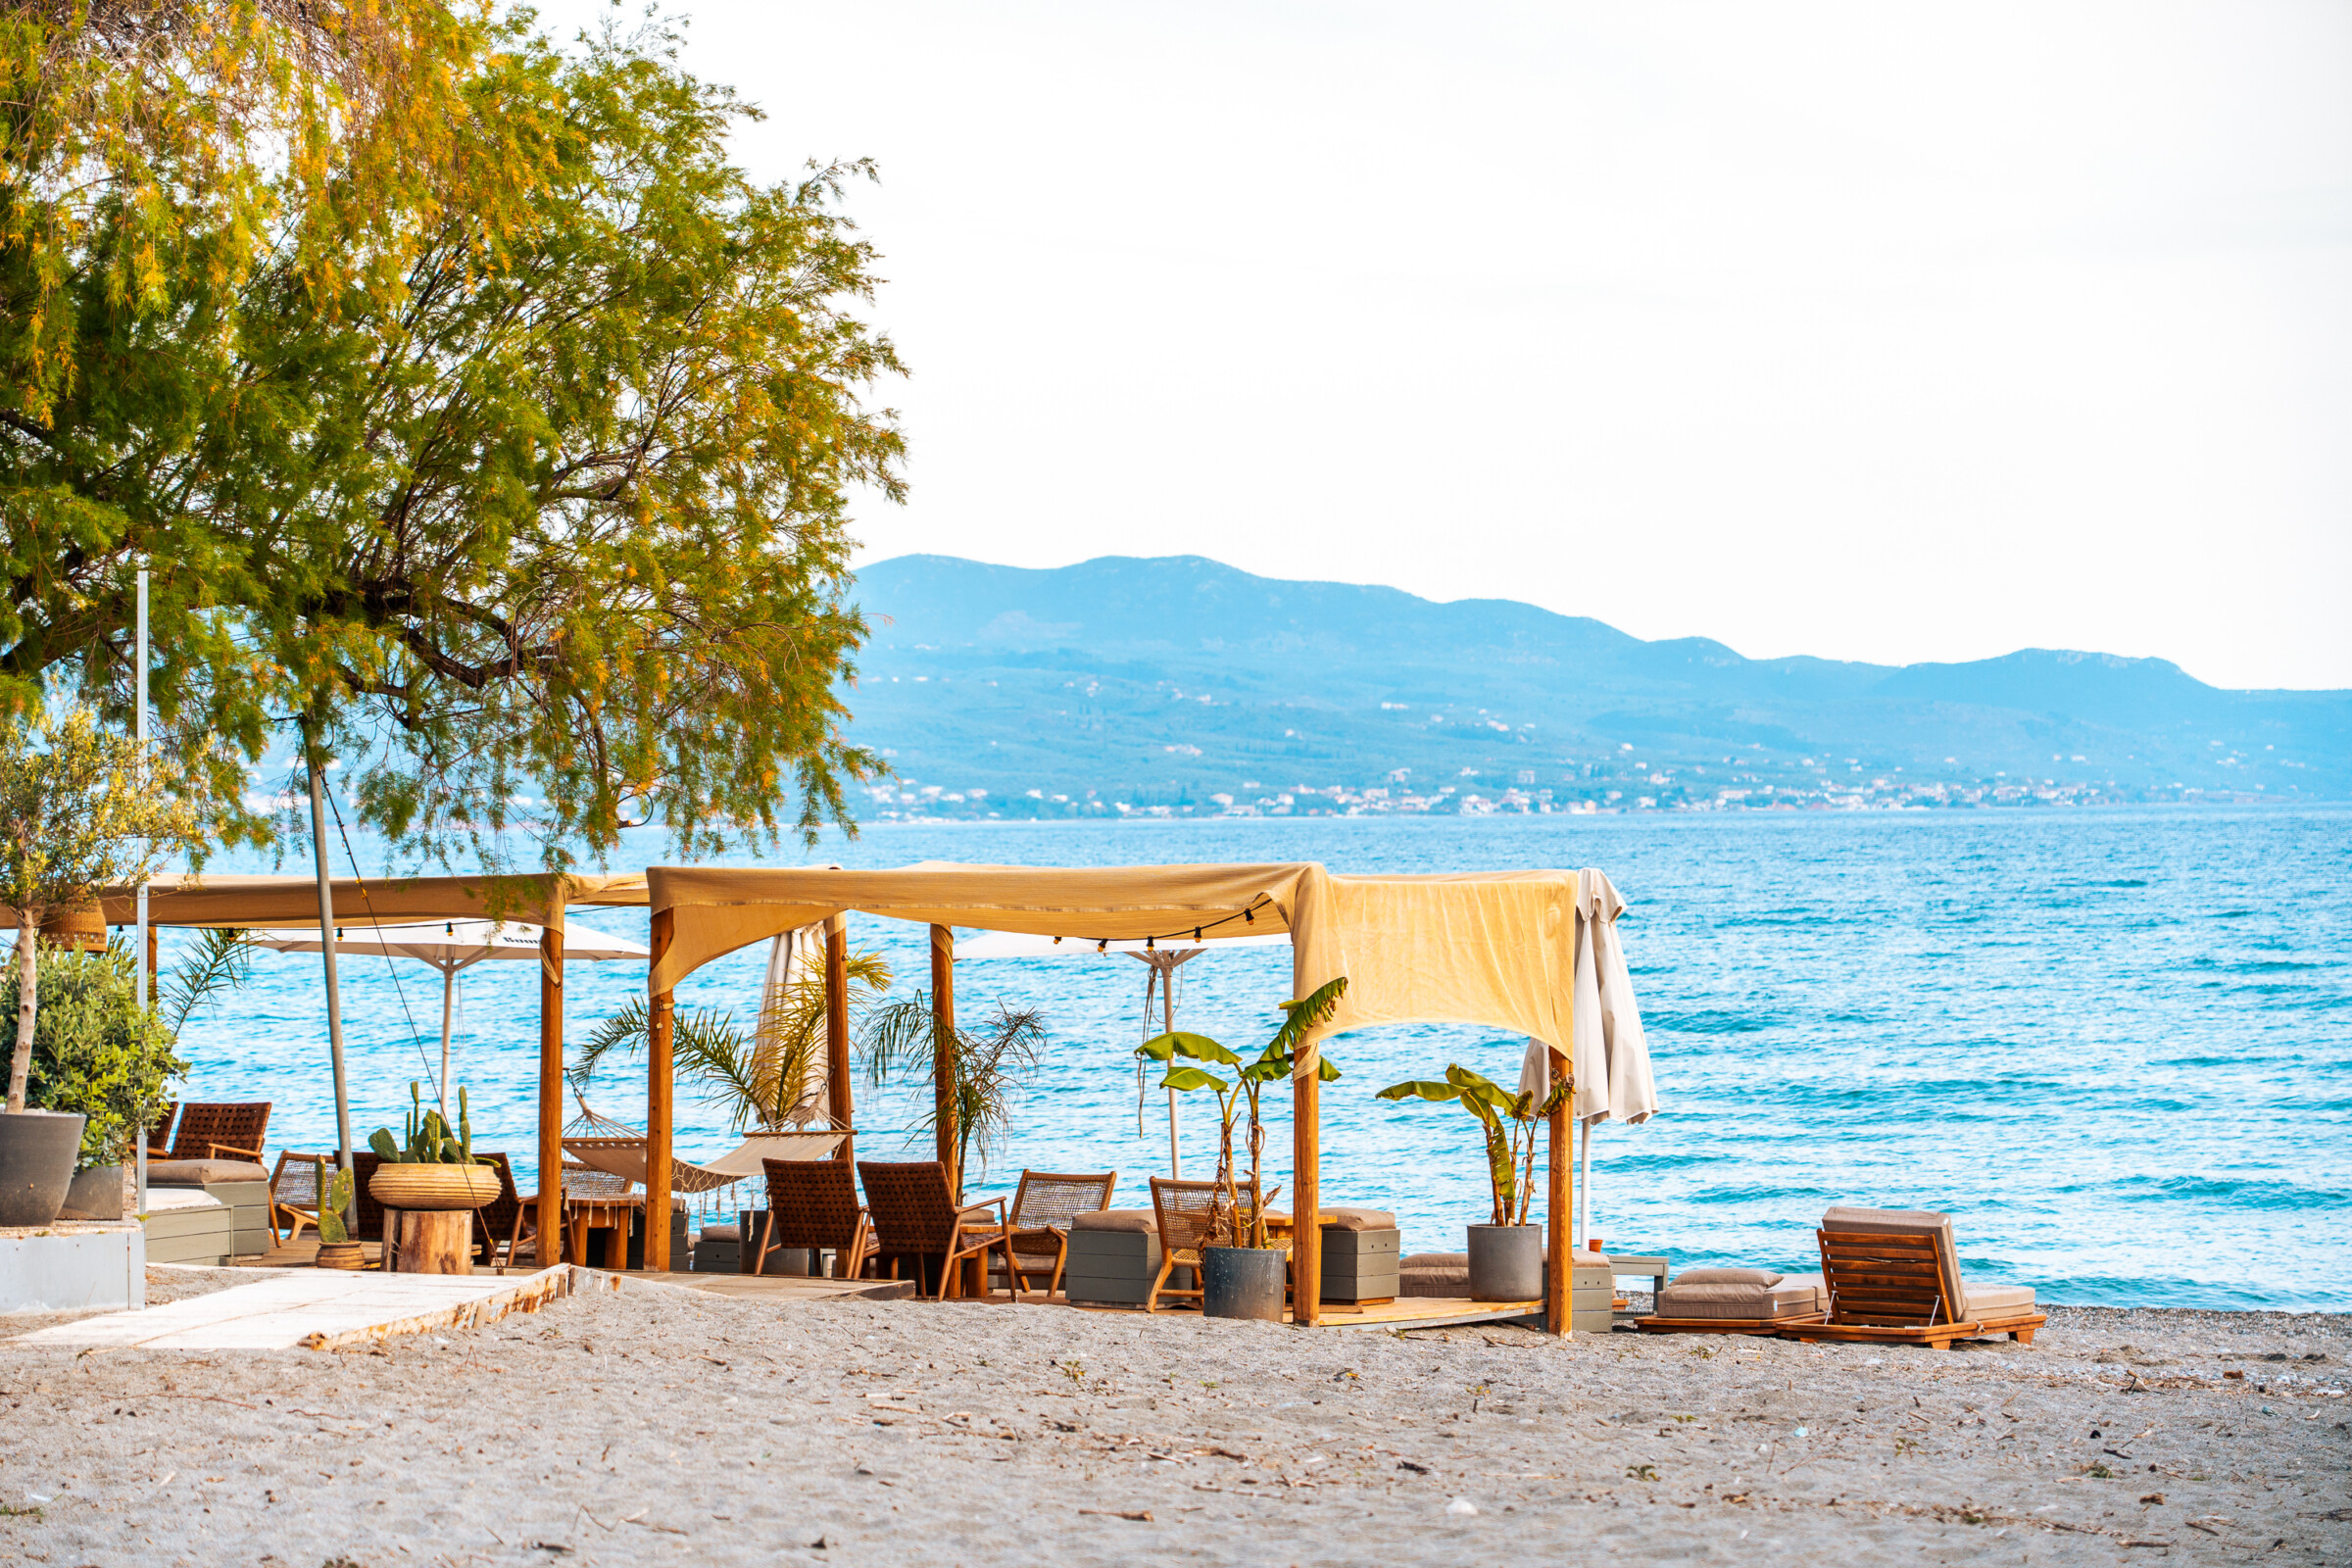 This image shows a beach café right by the calm sea and mountains in the background. 